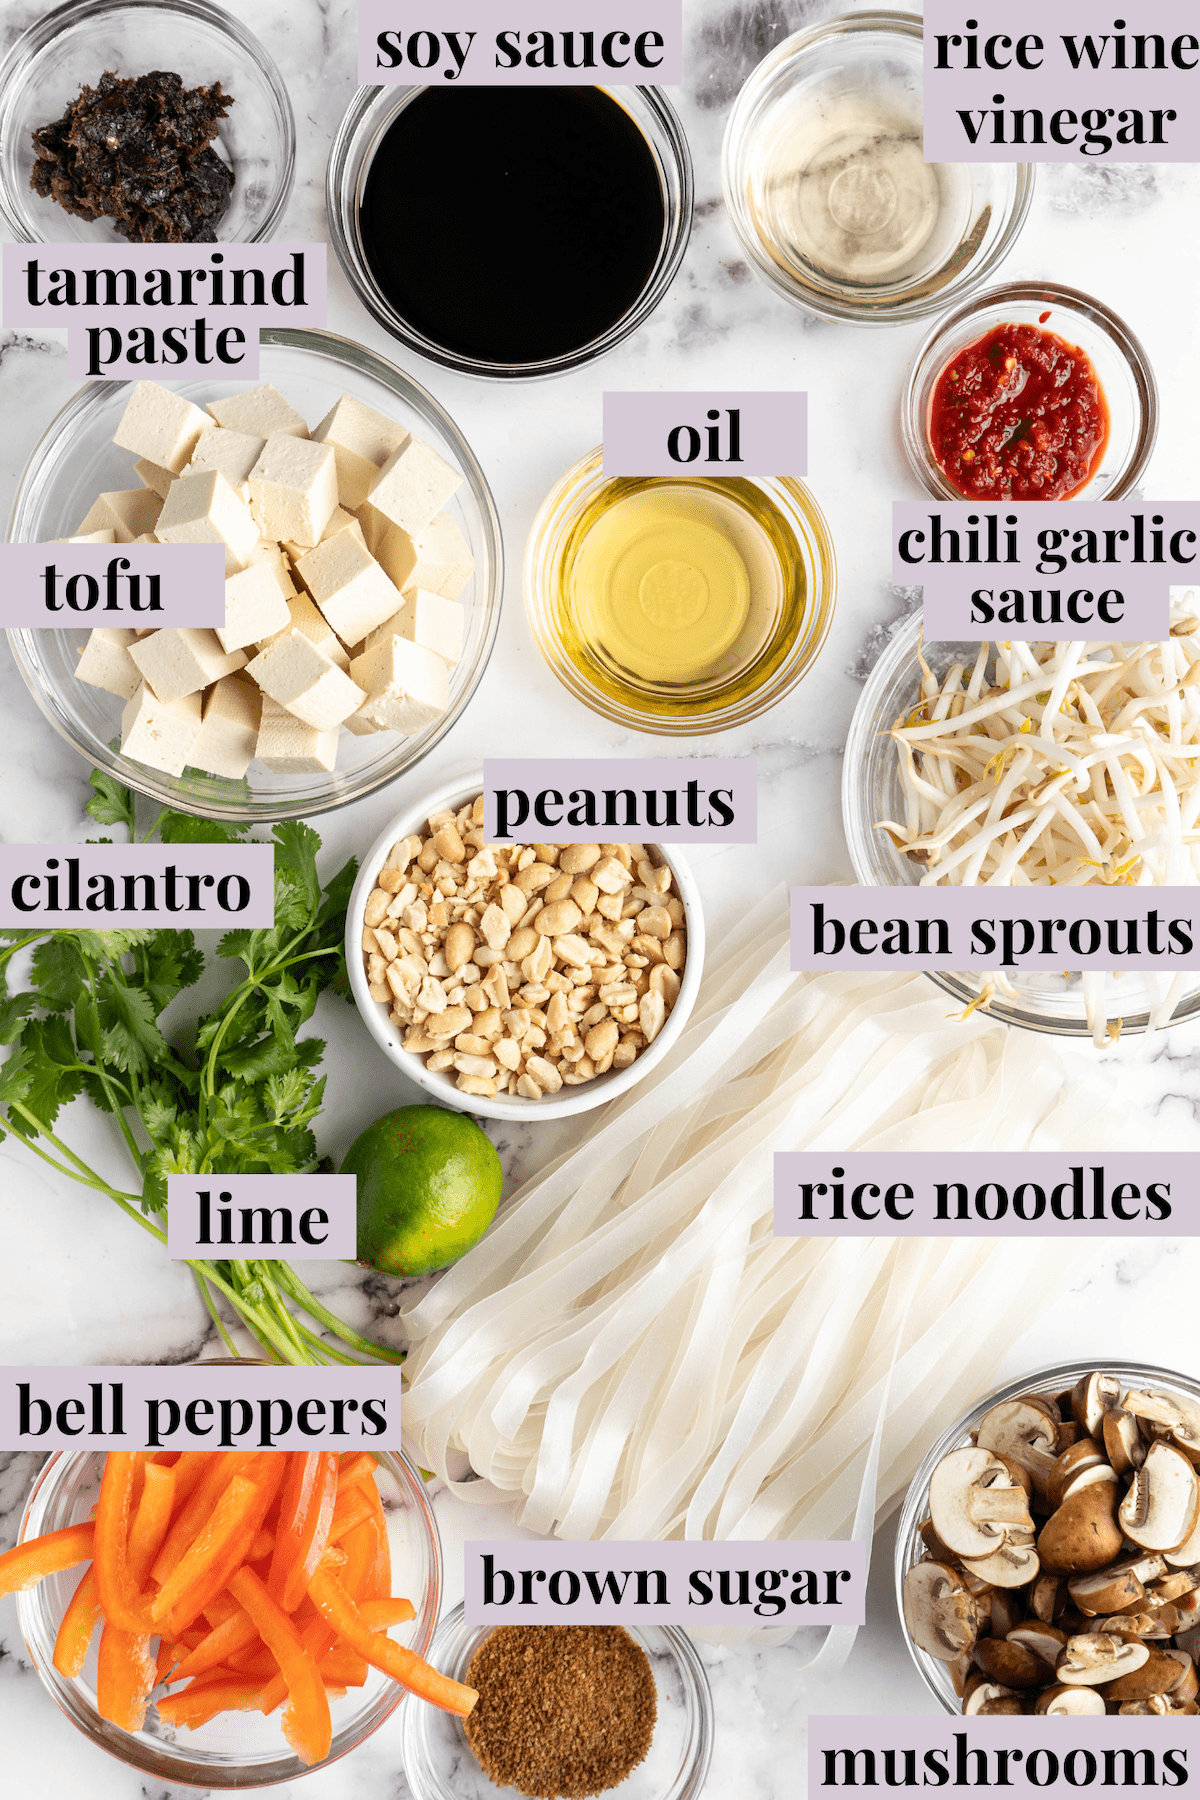 Overhead view of ingredients for vegan Pad Thai with labels